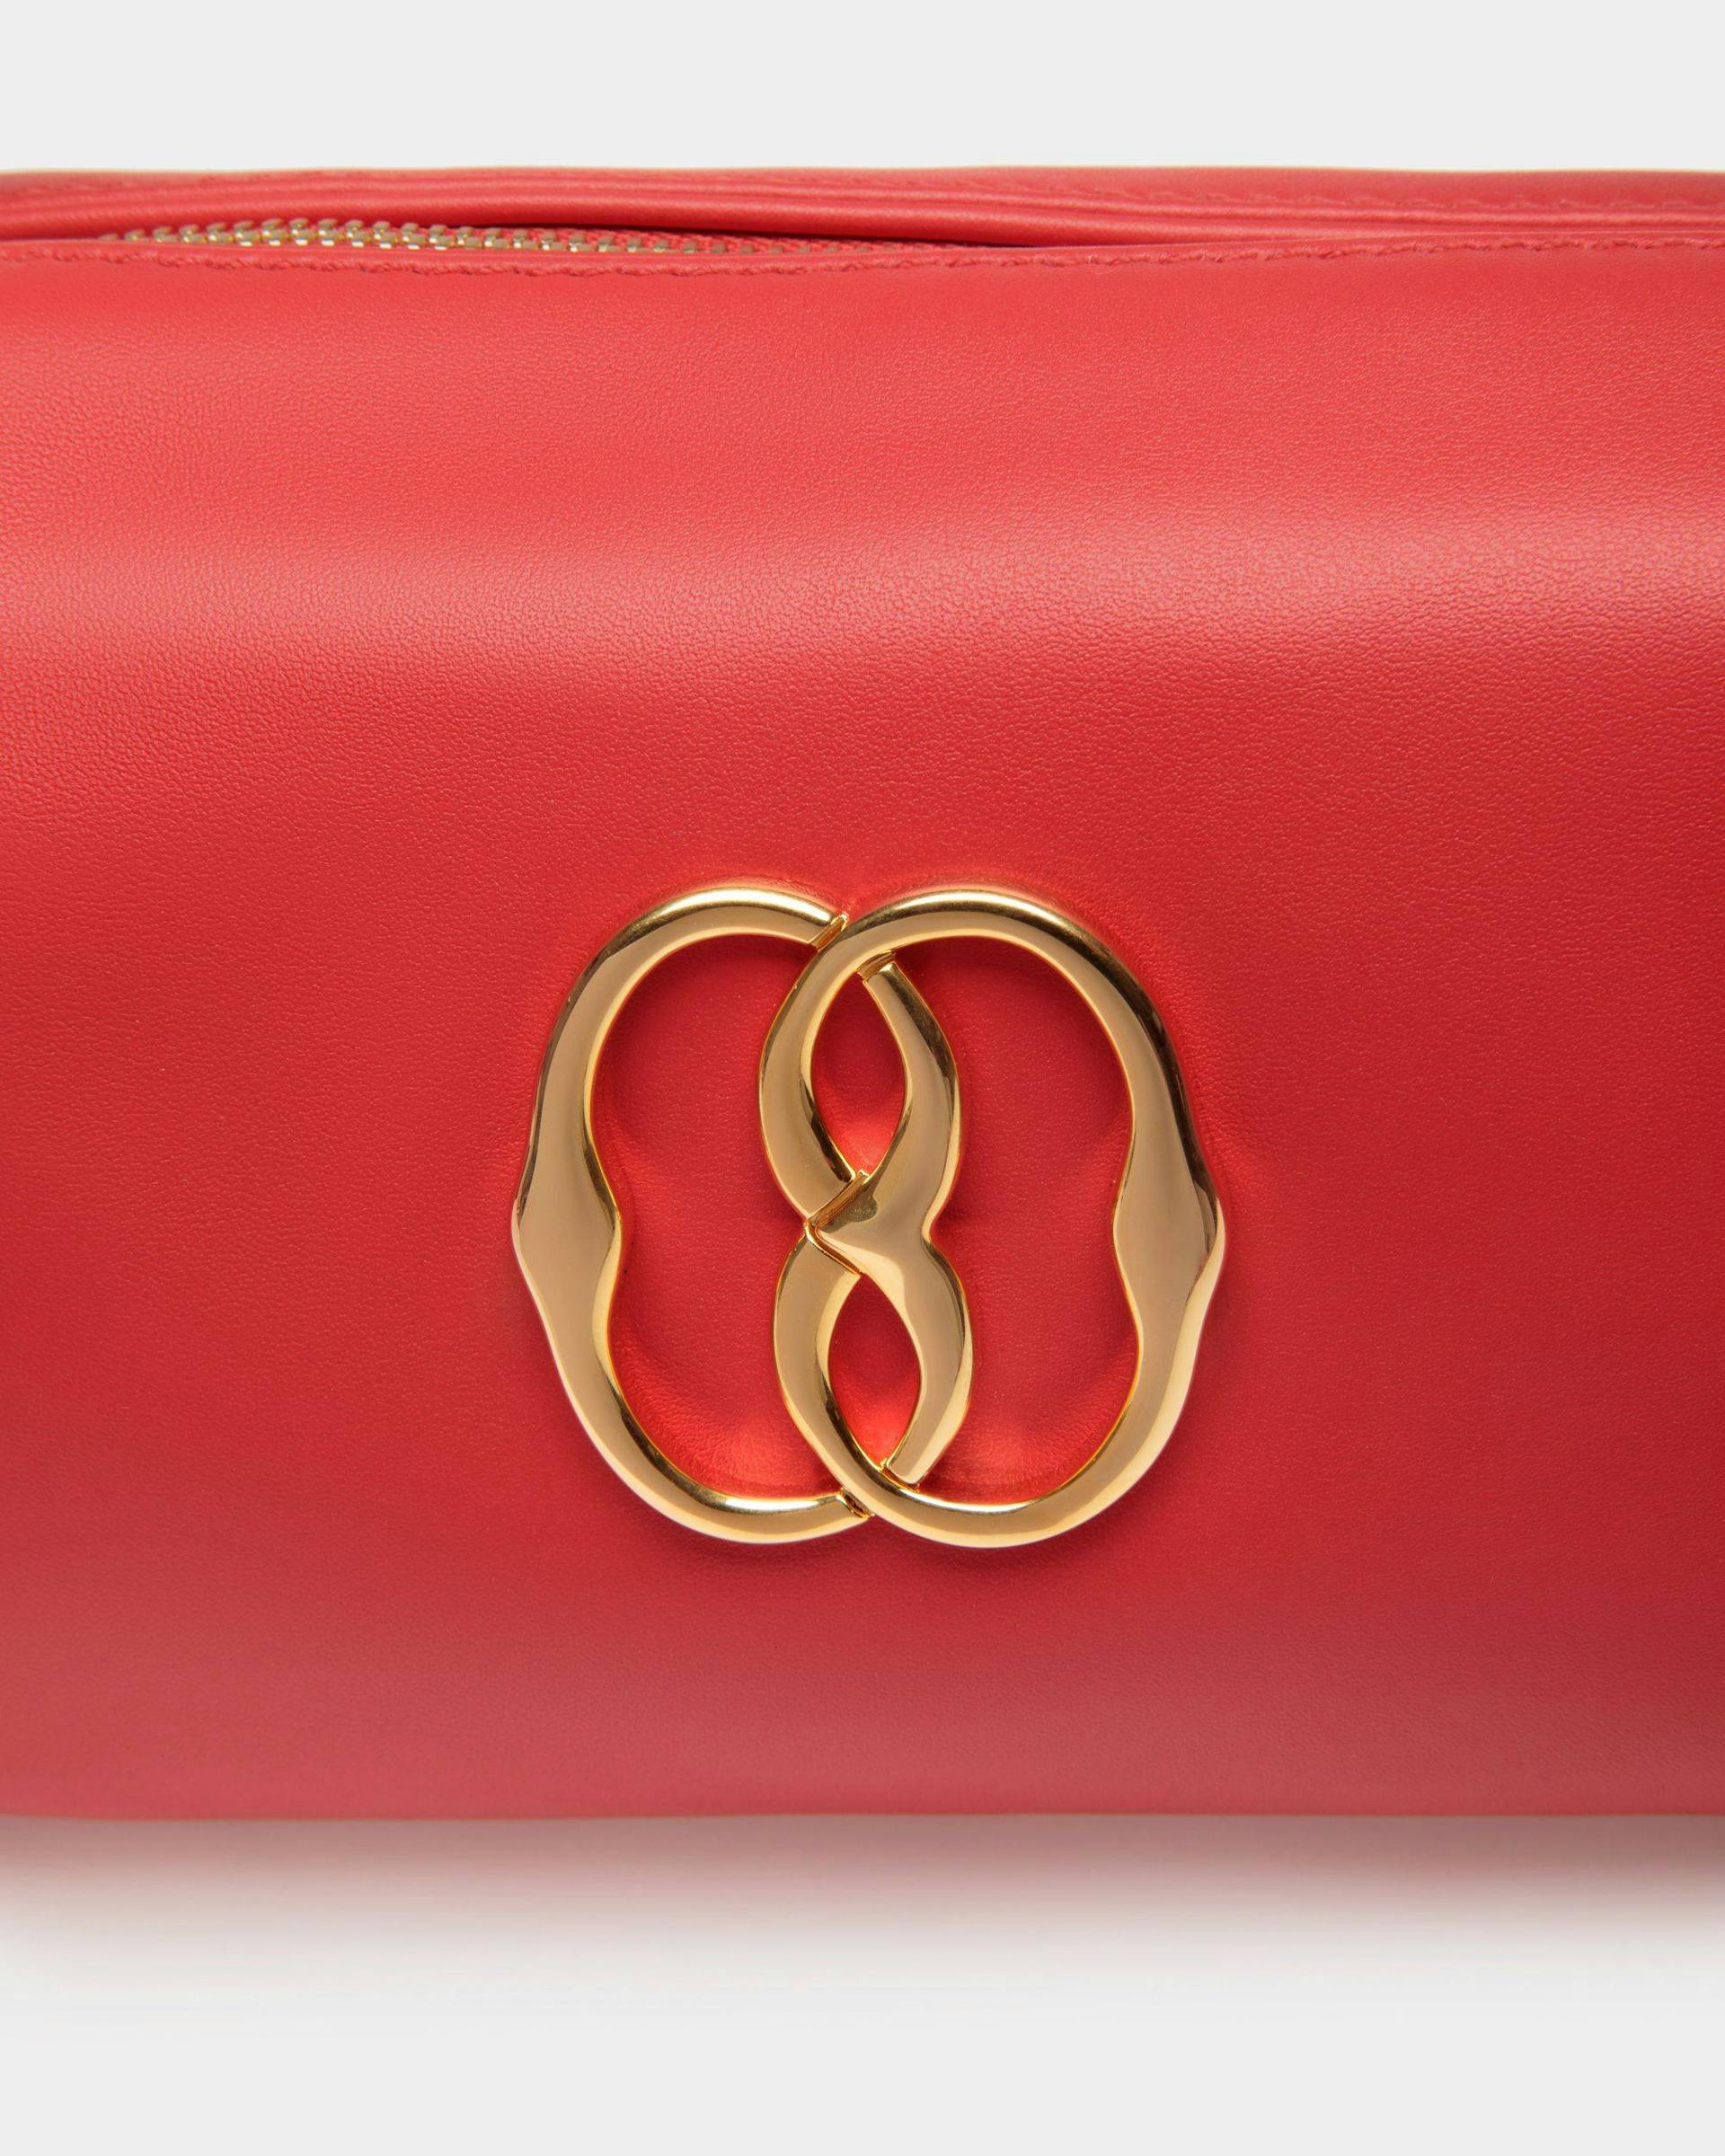 Women's Emblem Mini Bag In Red Leather | Bally | Still Life Detail